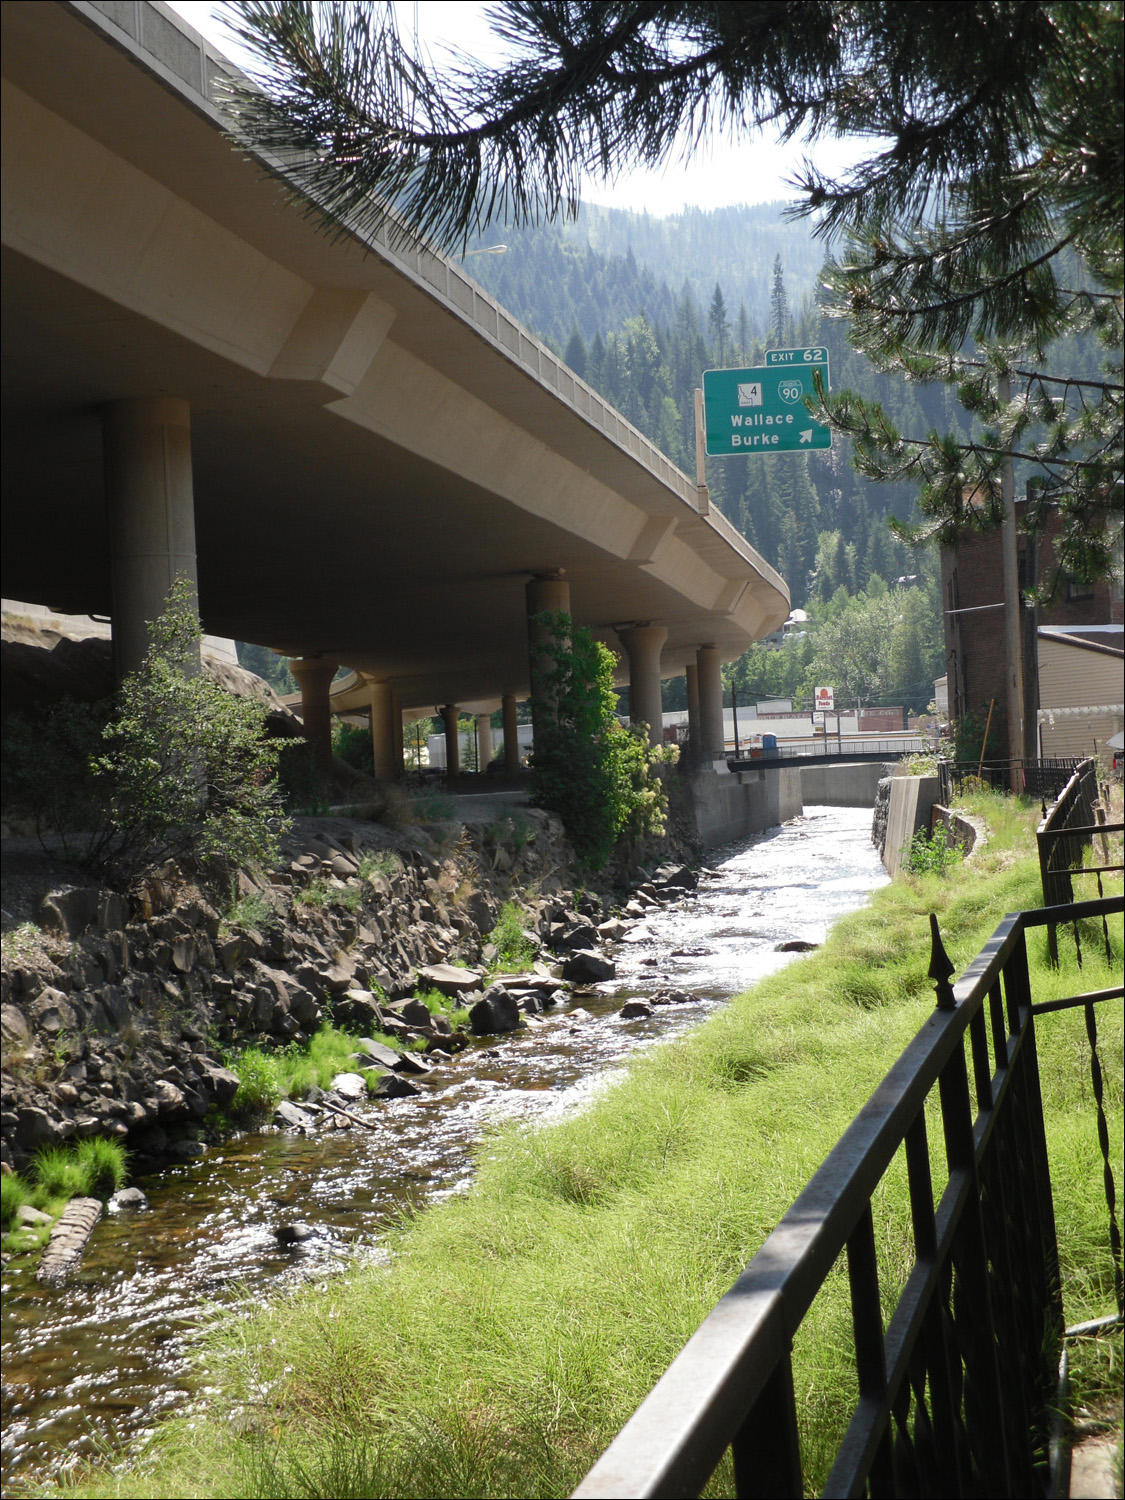 Wallace, ID-I-90 flyover and Coeur d'Alene River